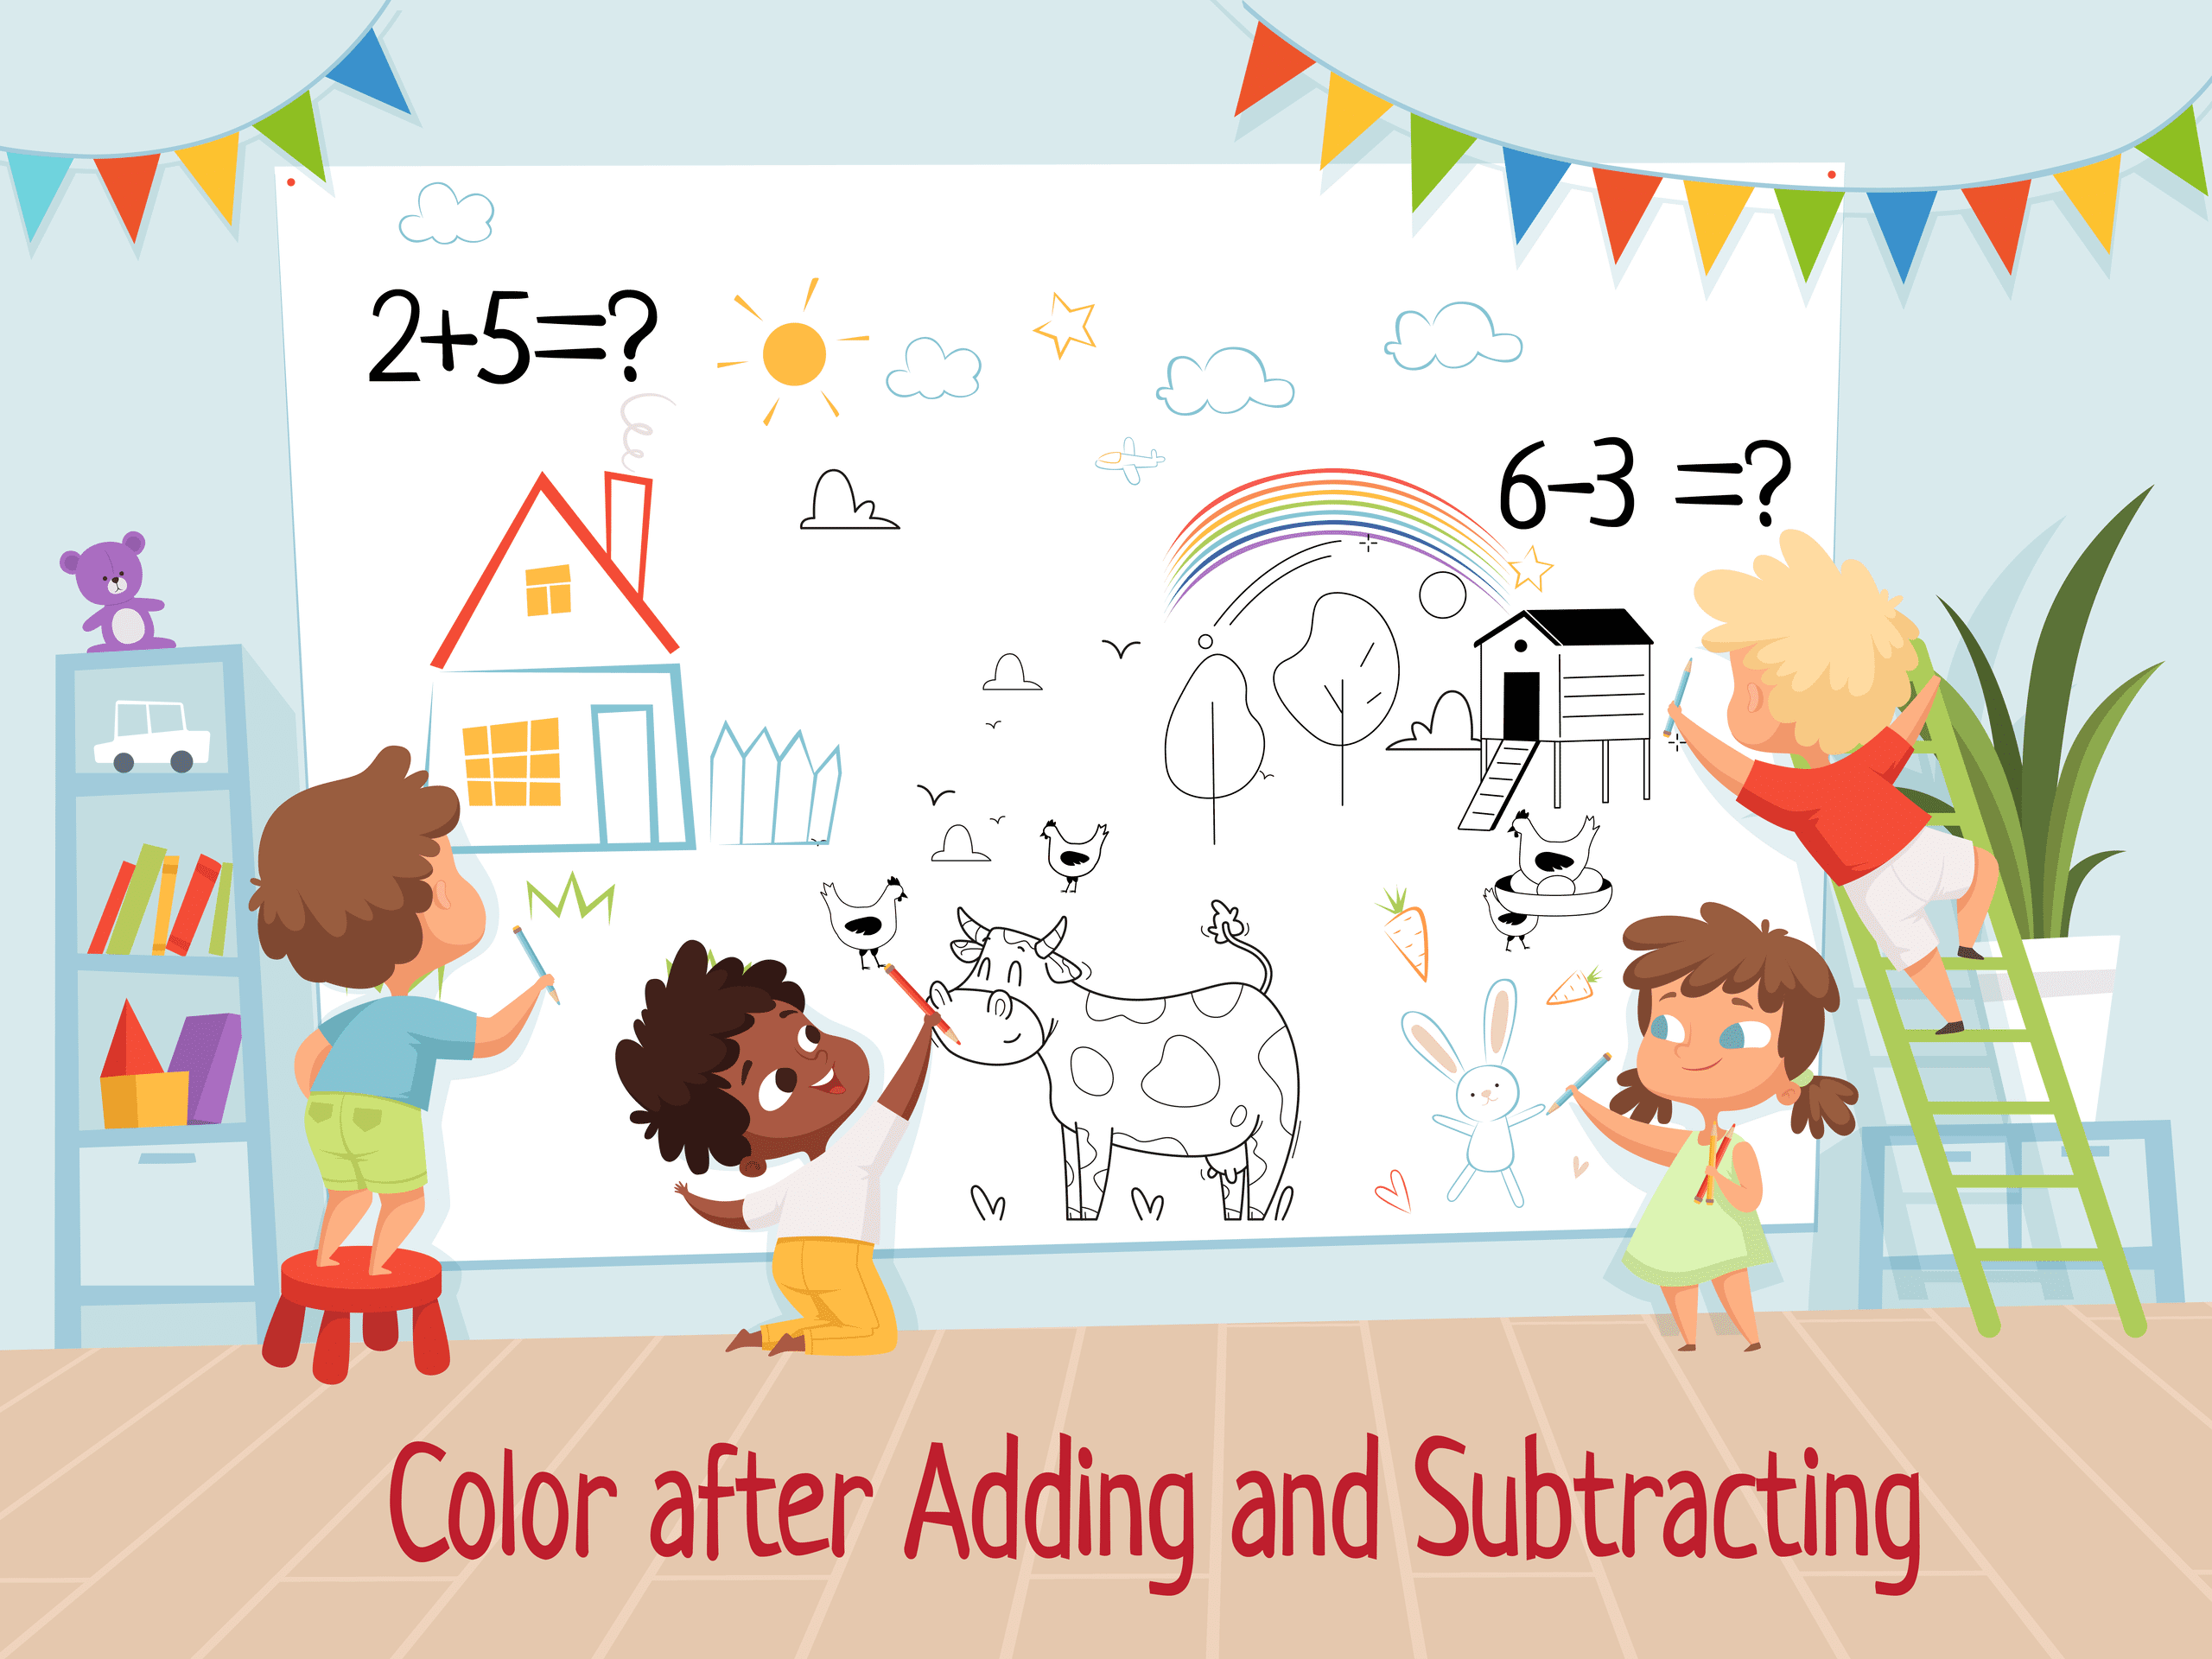 Doing Addition and Subtraction for Farm Coloring.